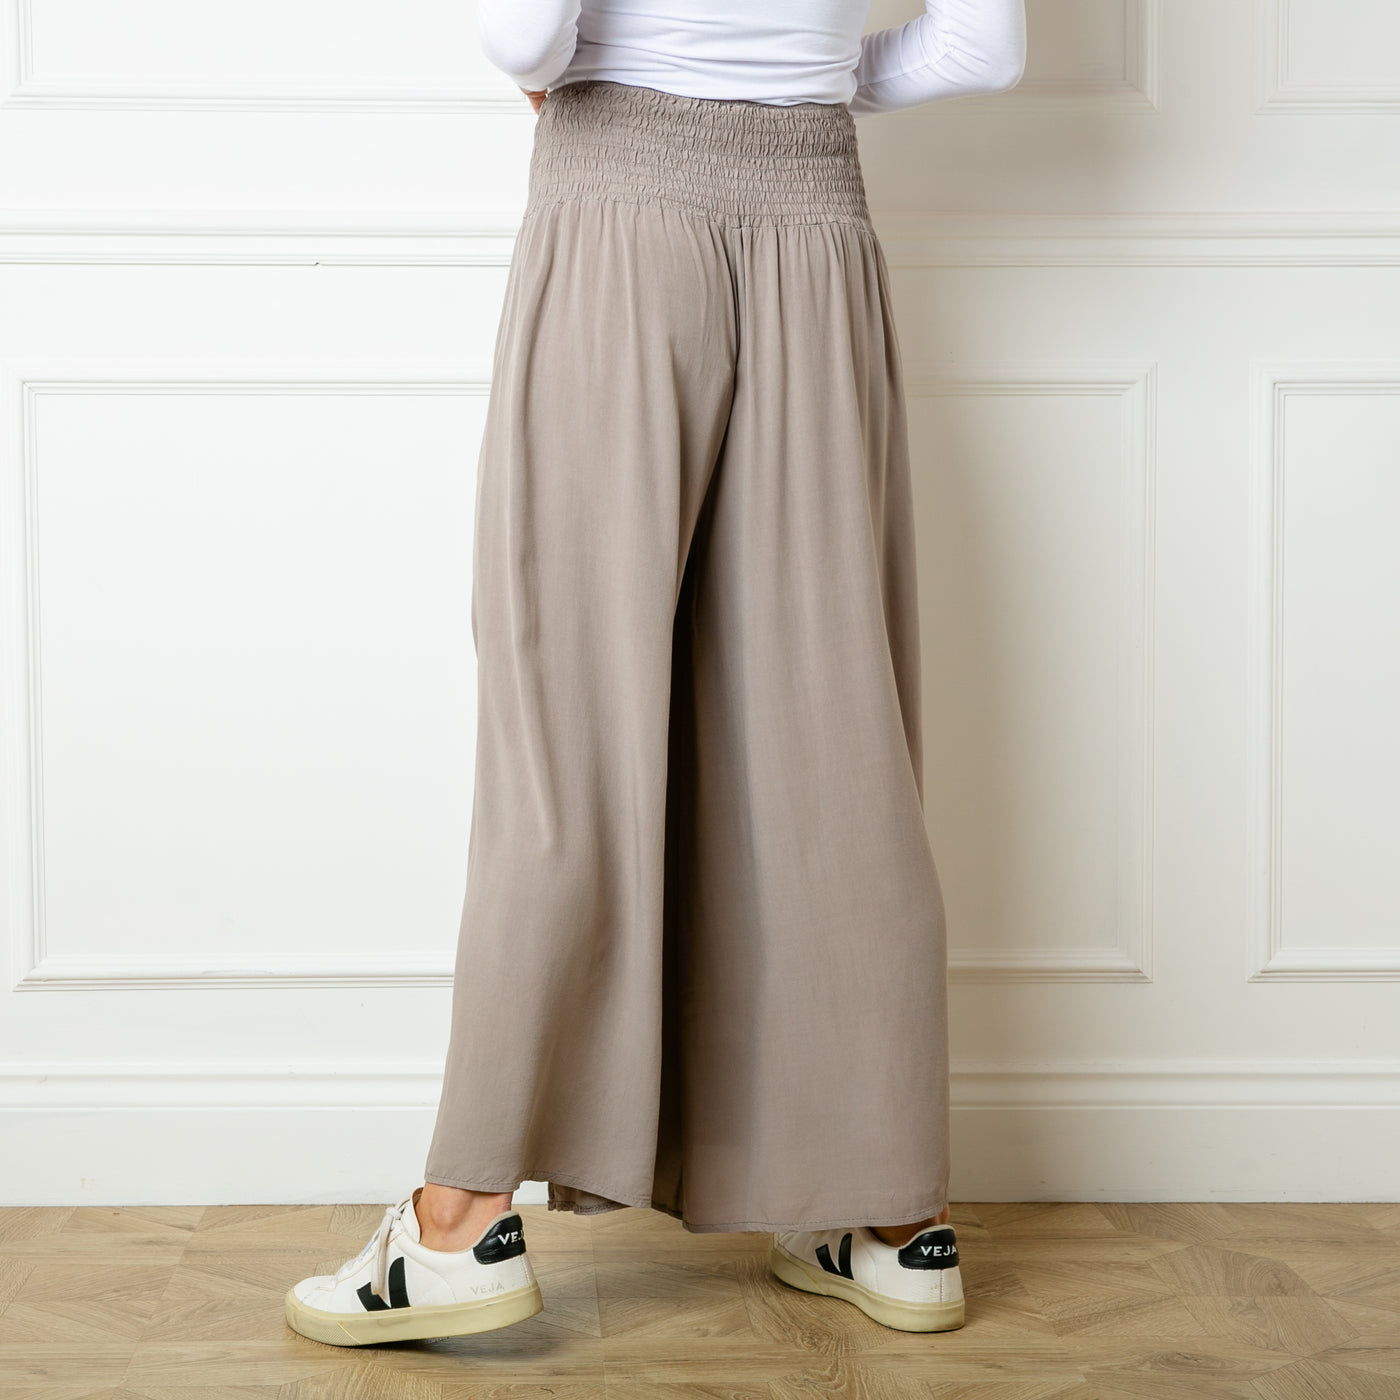 The taupe brown Shirred waist wide leg trousers featuring a wide, stretchy elasticated waistband